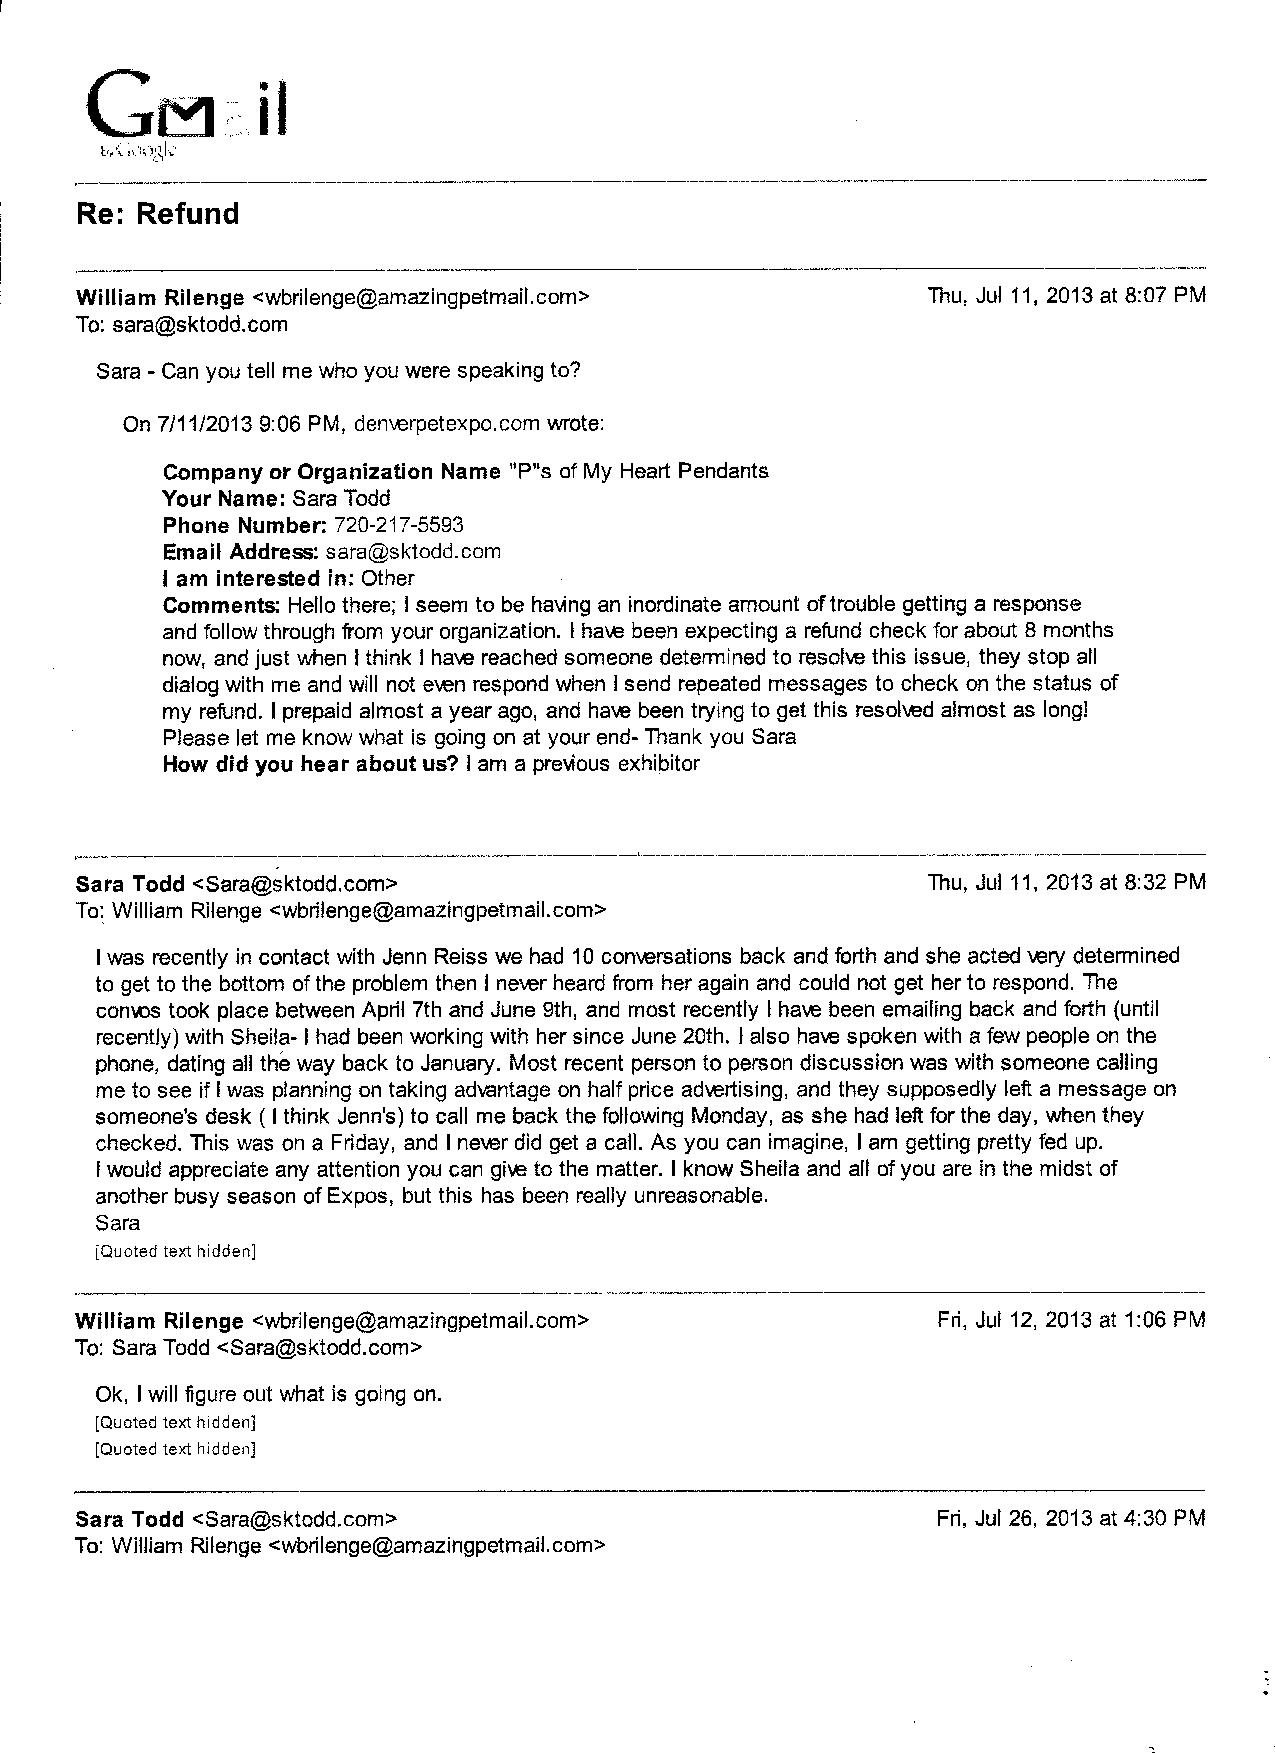 Copy of just one of 7+ pages of emails to William Rilenge and his wife and employees.